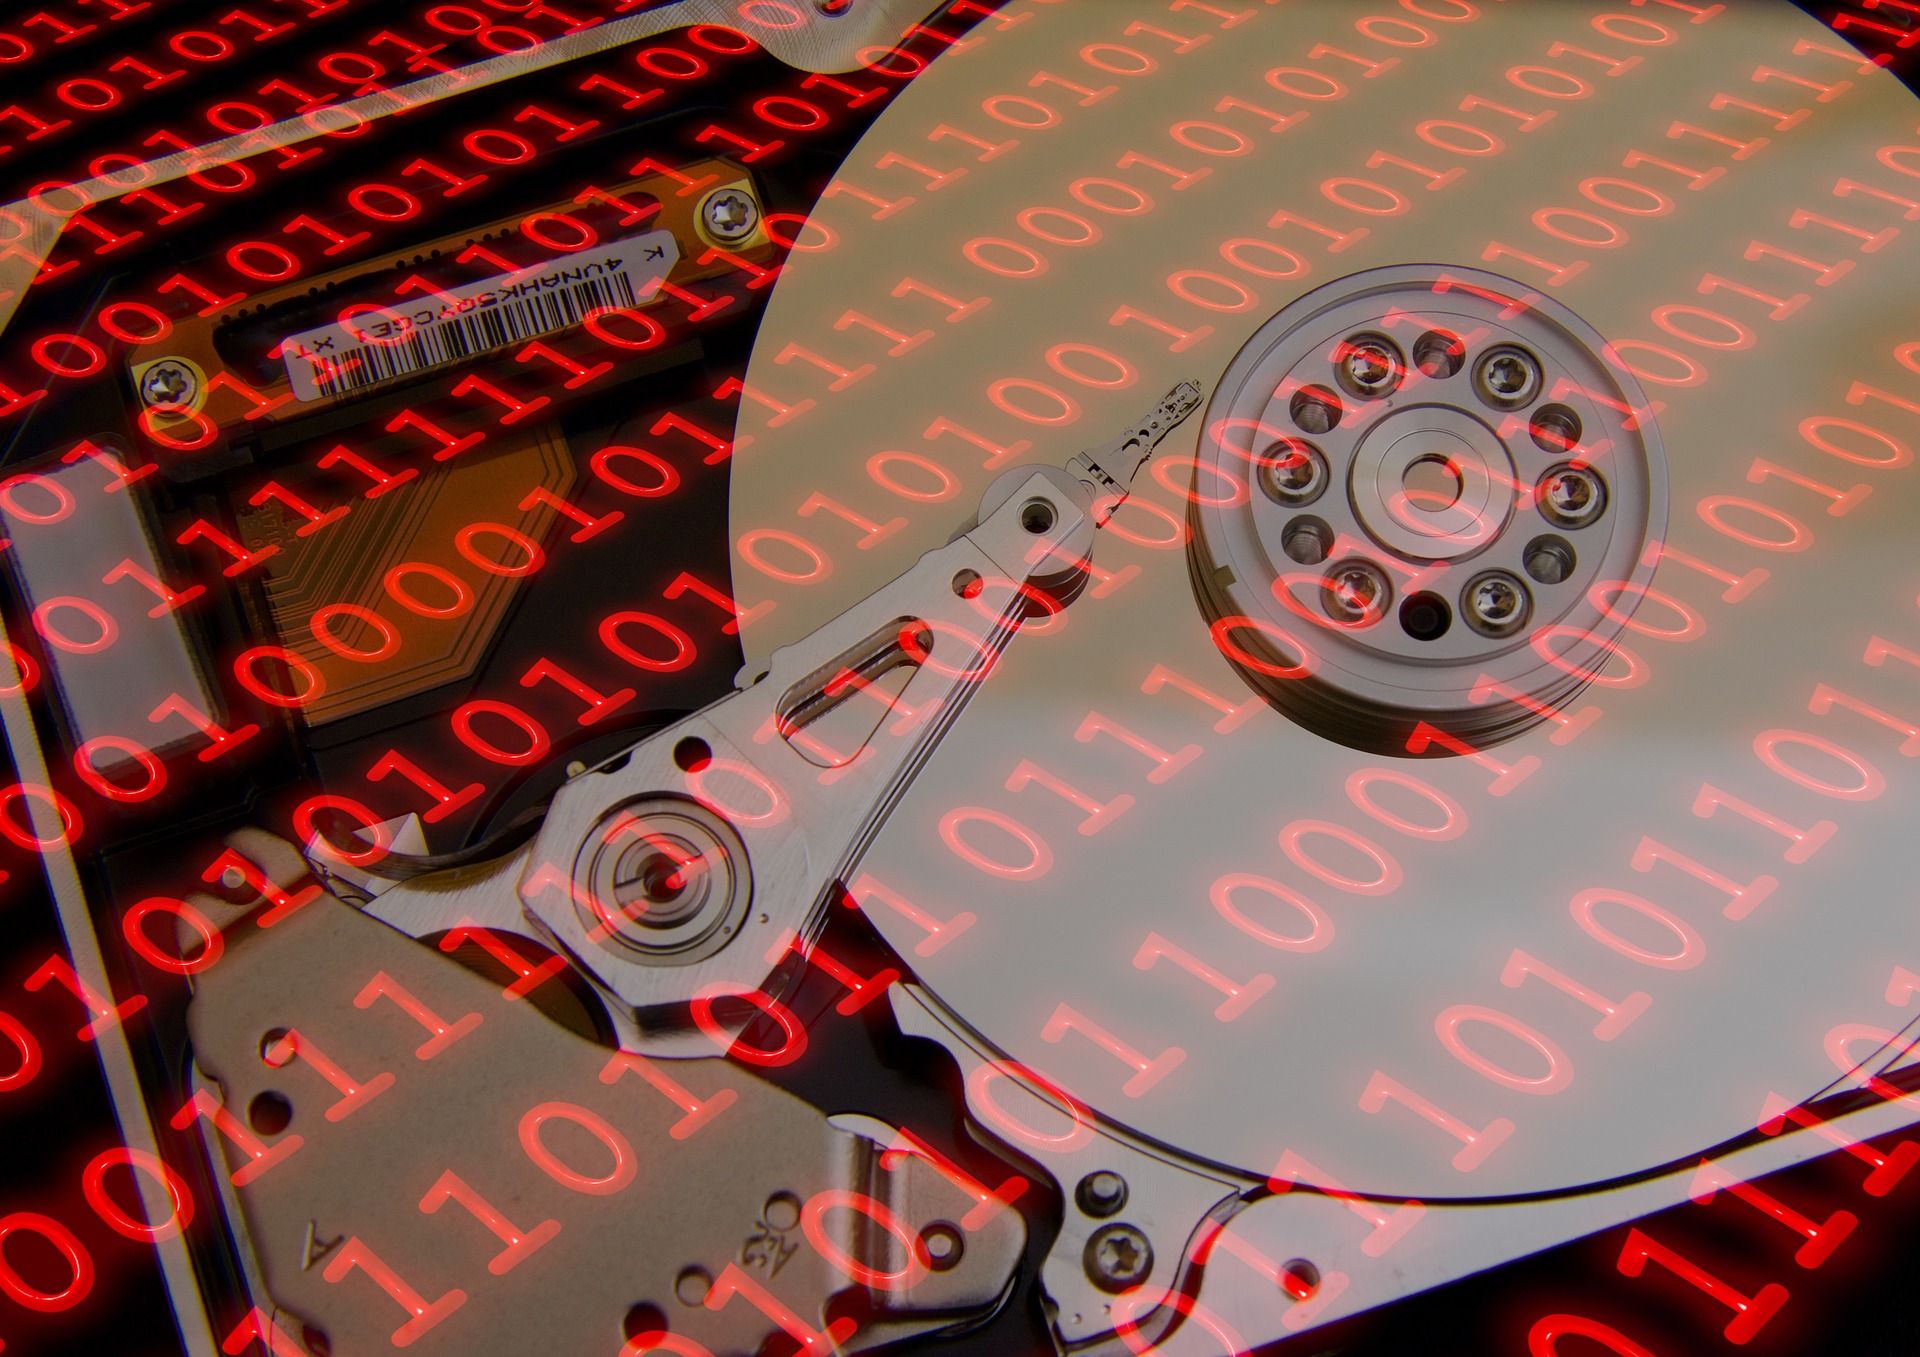 What if all your data files on Internet were simply lost one day?